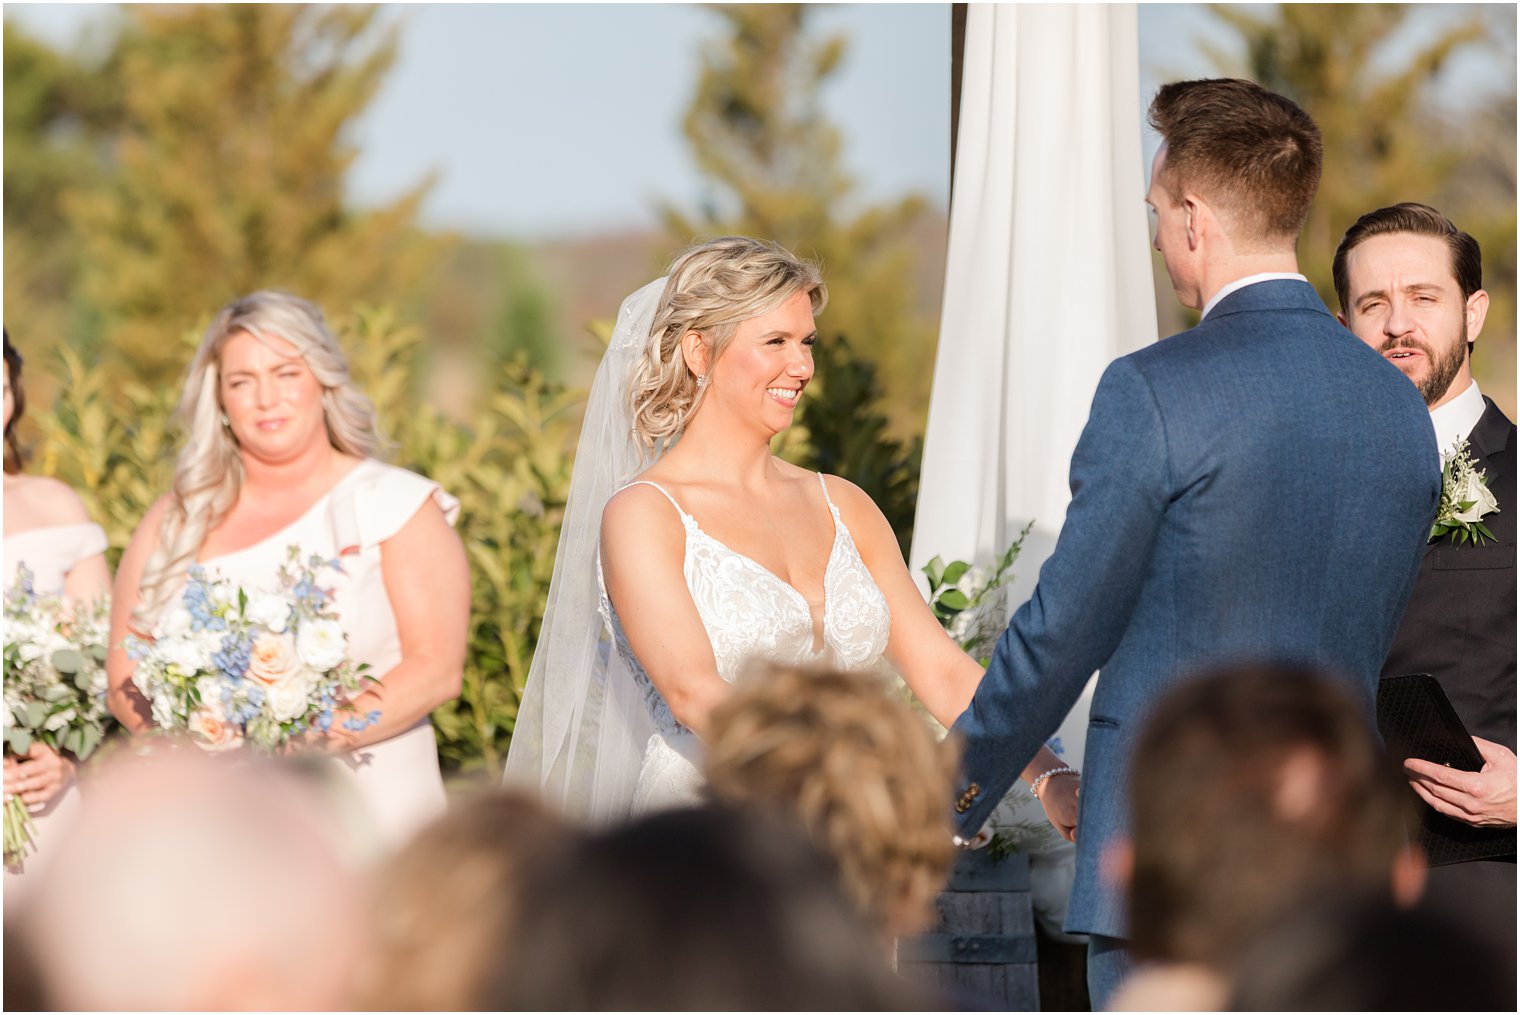 bride smiling during outdoor ceremony at Renault Winery in Egg Harbor Township, NJ